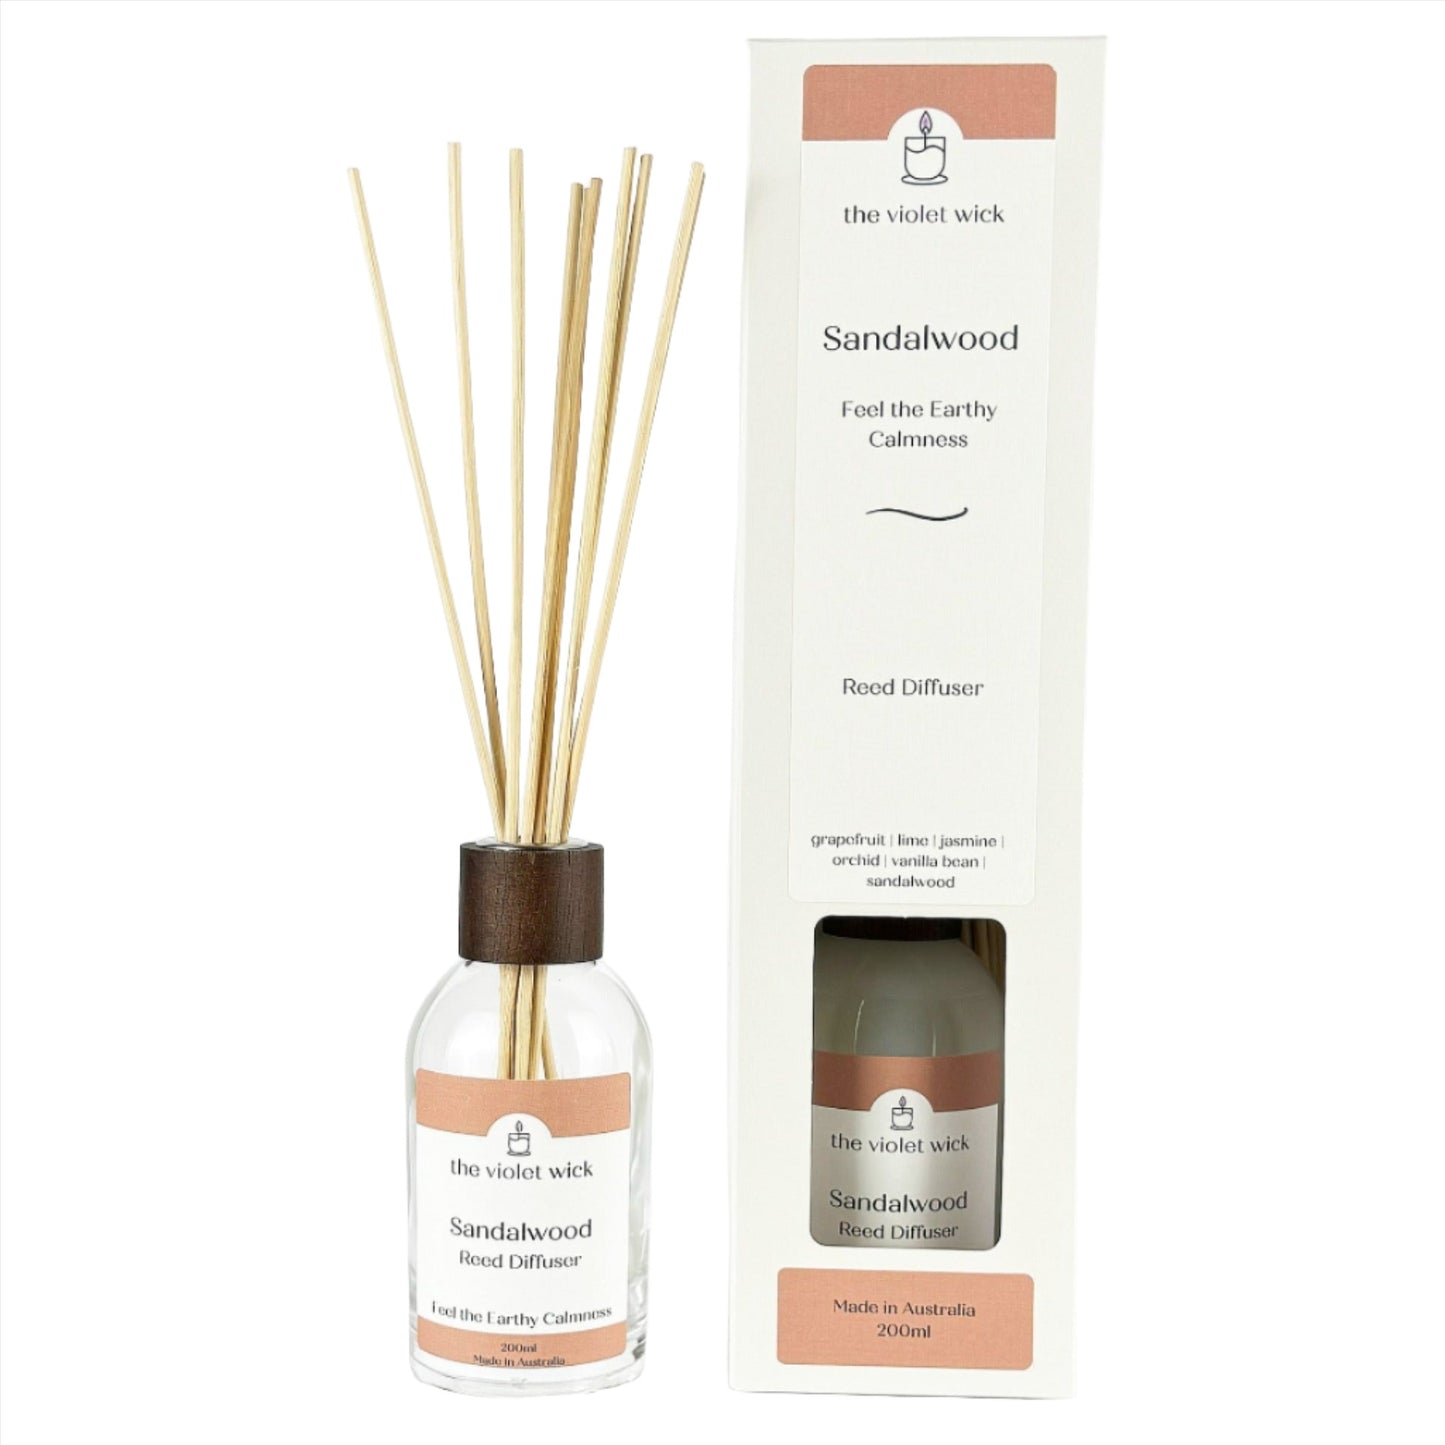 Sandalwood Reed Diffuser from The Violet Wick